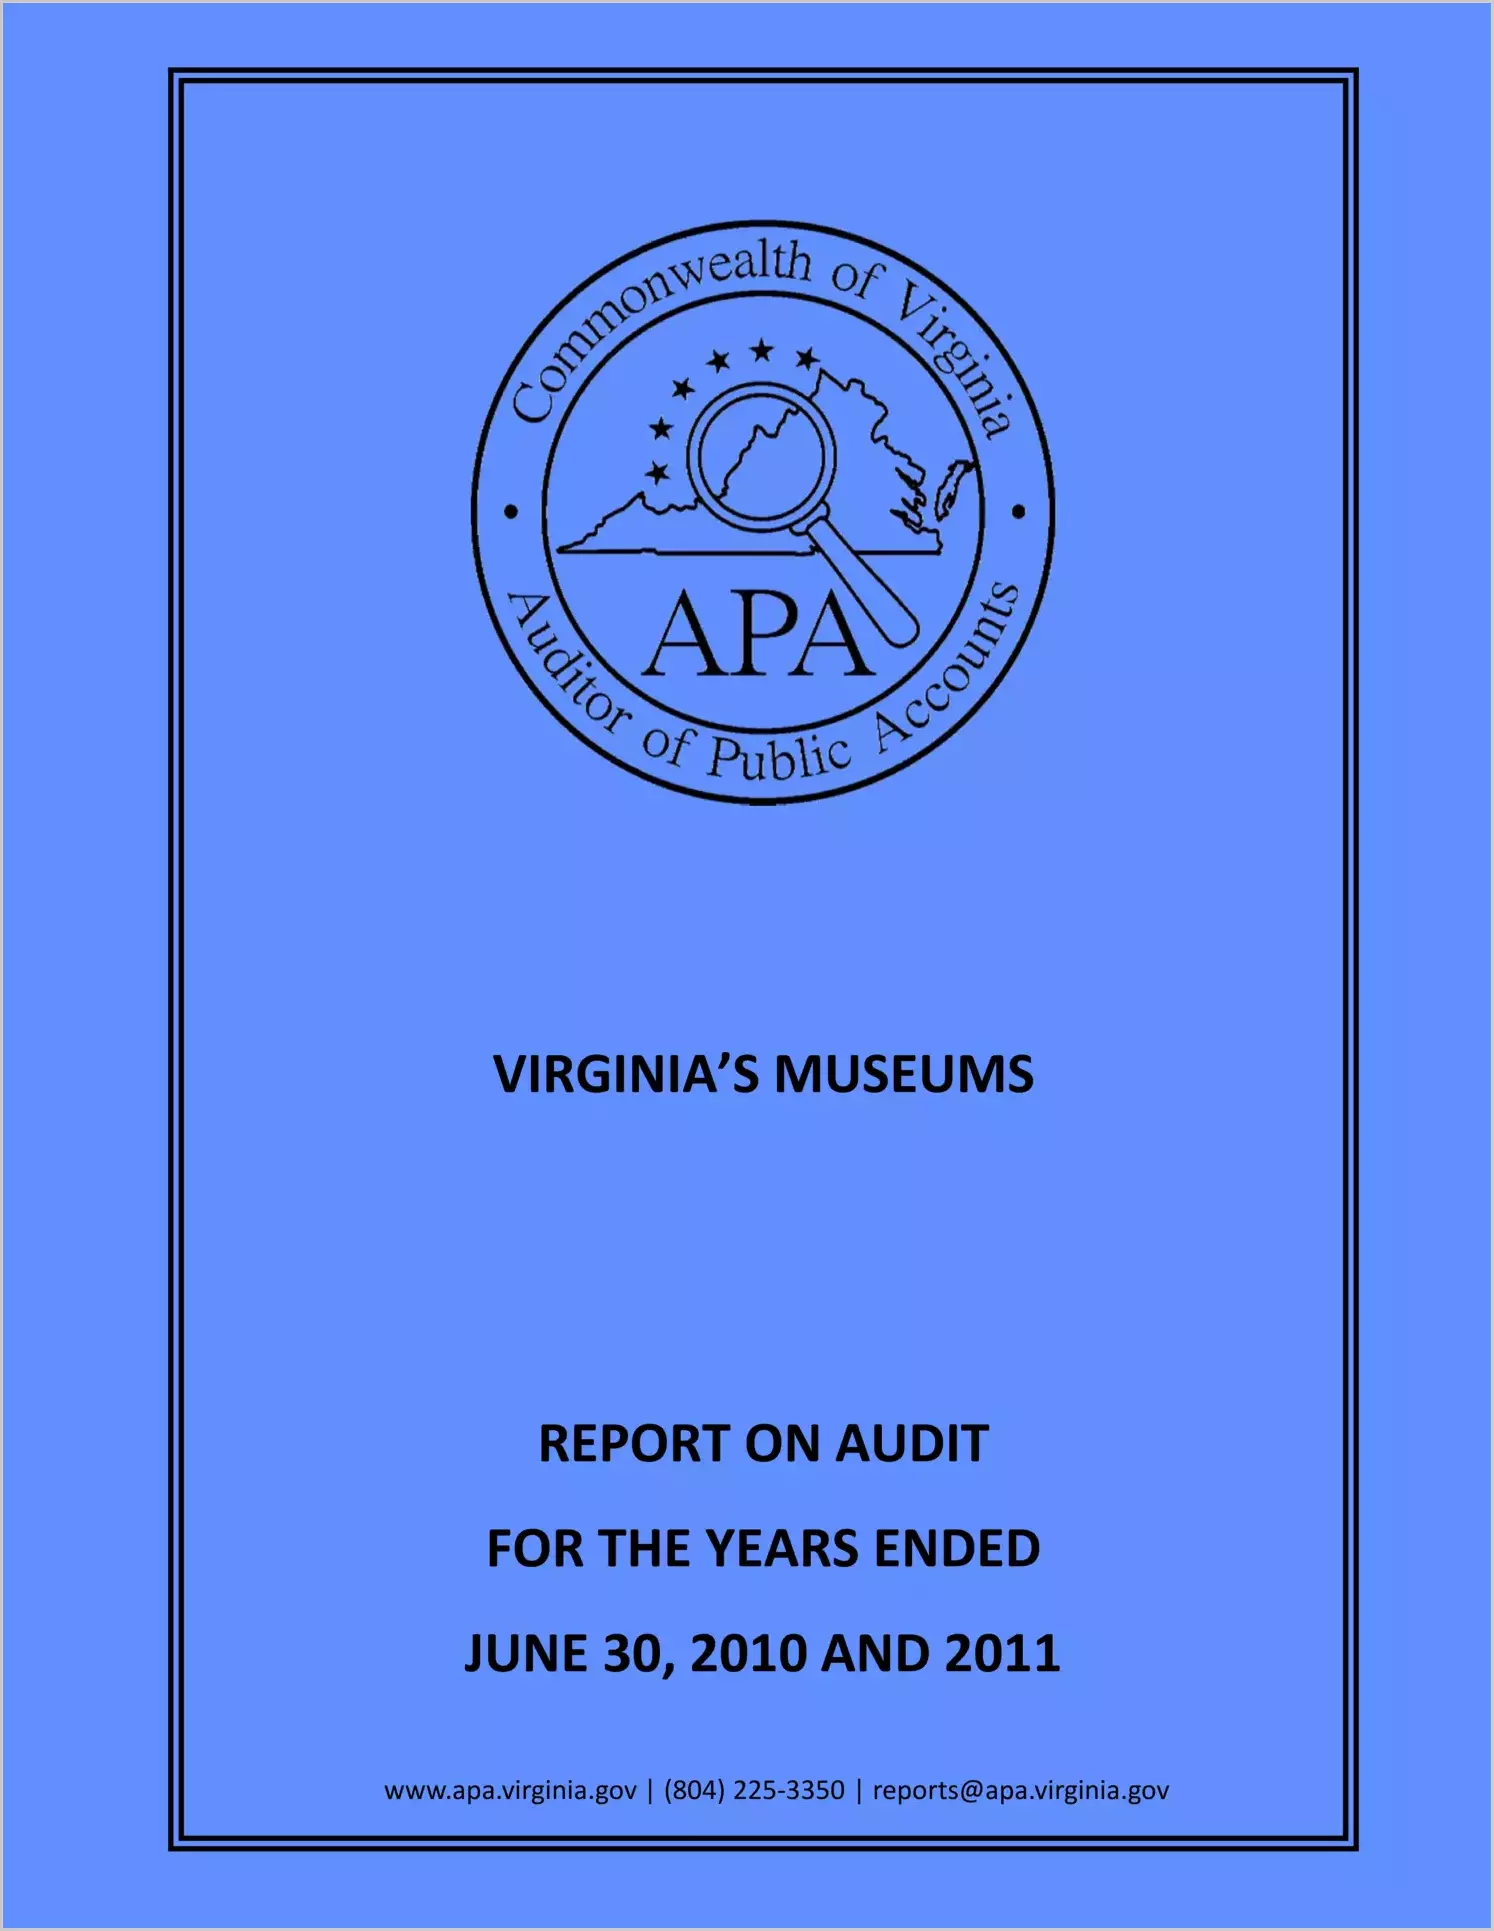 Virginia's Museums - report on audit for the years ended June 30, 2010 and 2011